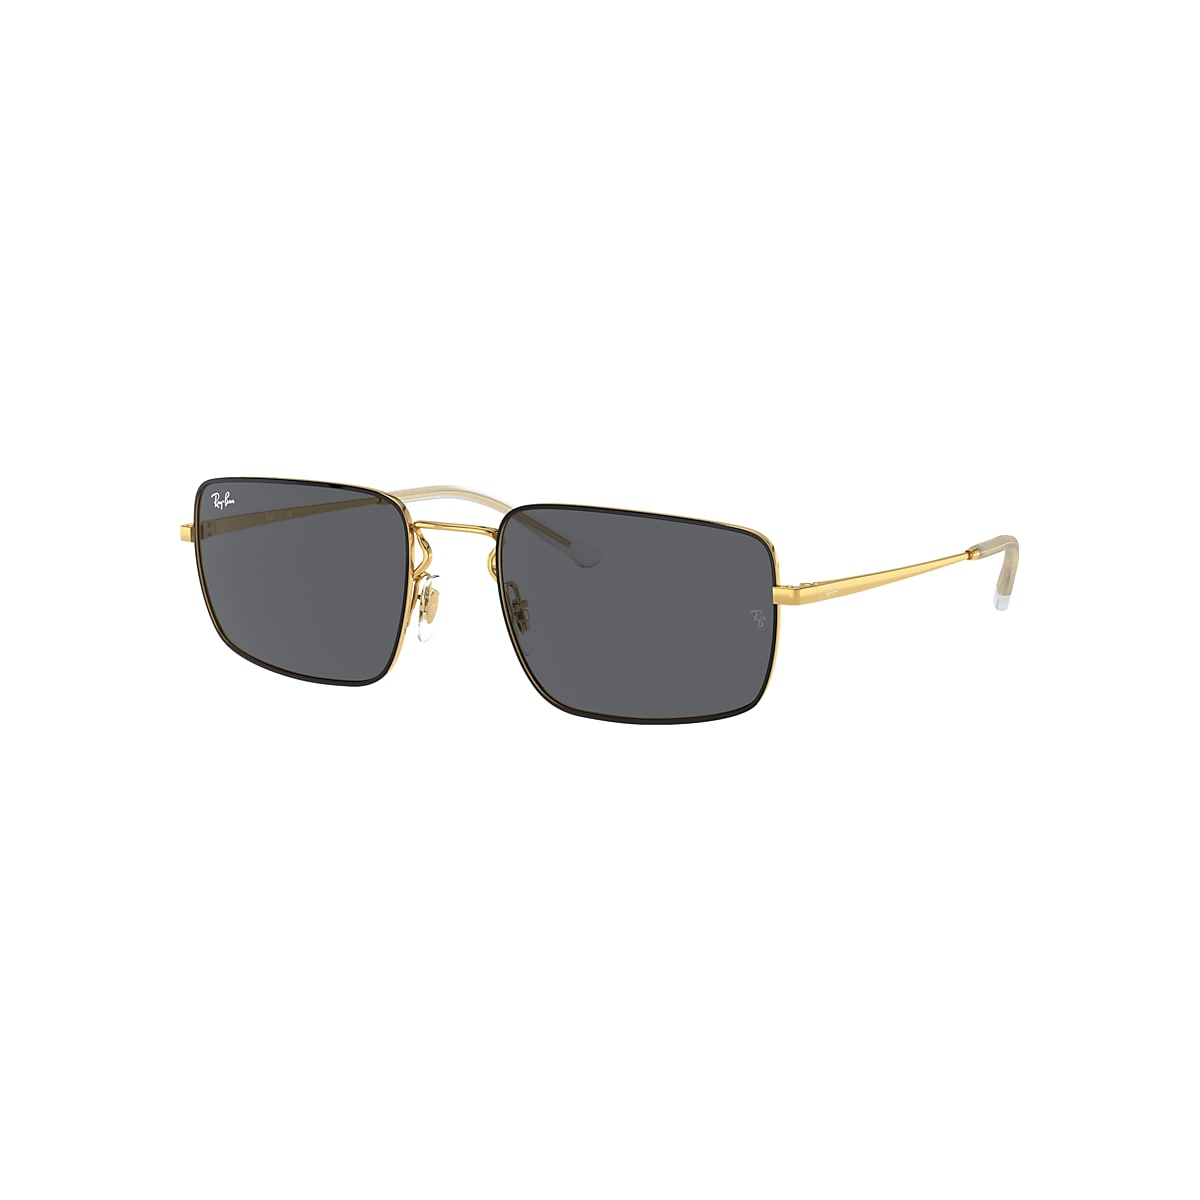 RB3669 Sunglasses in Black On Gold and Grey - RB3669 | Ray-Ban 